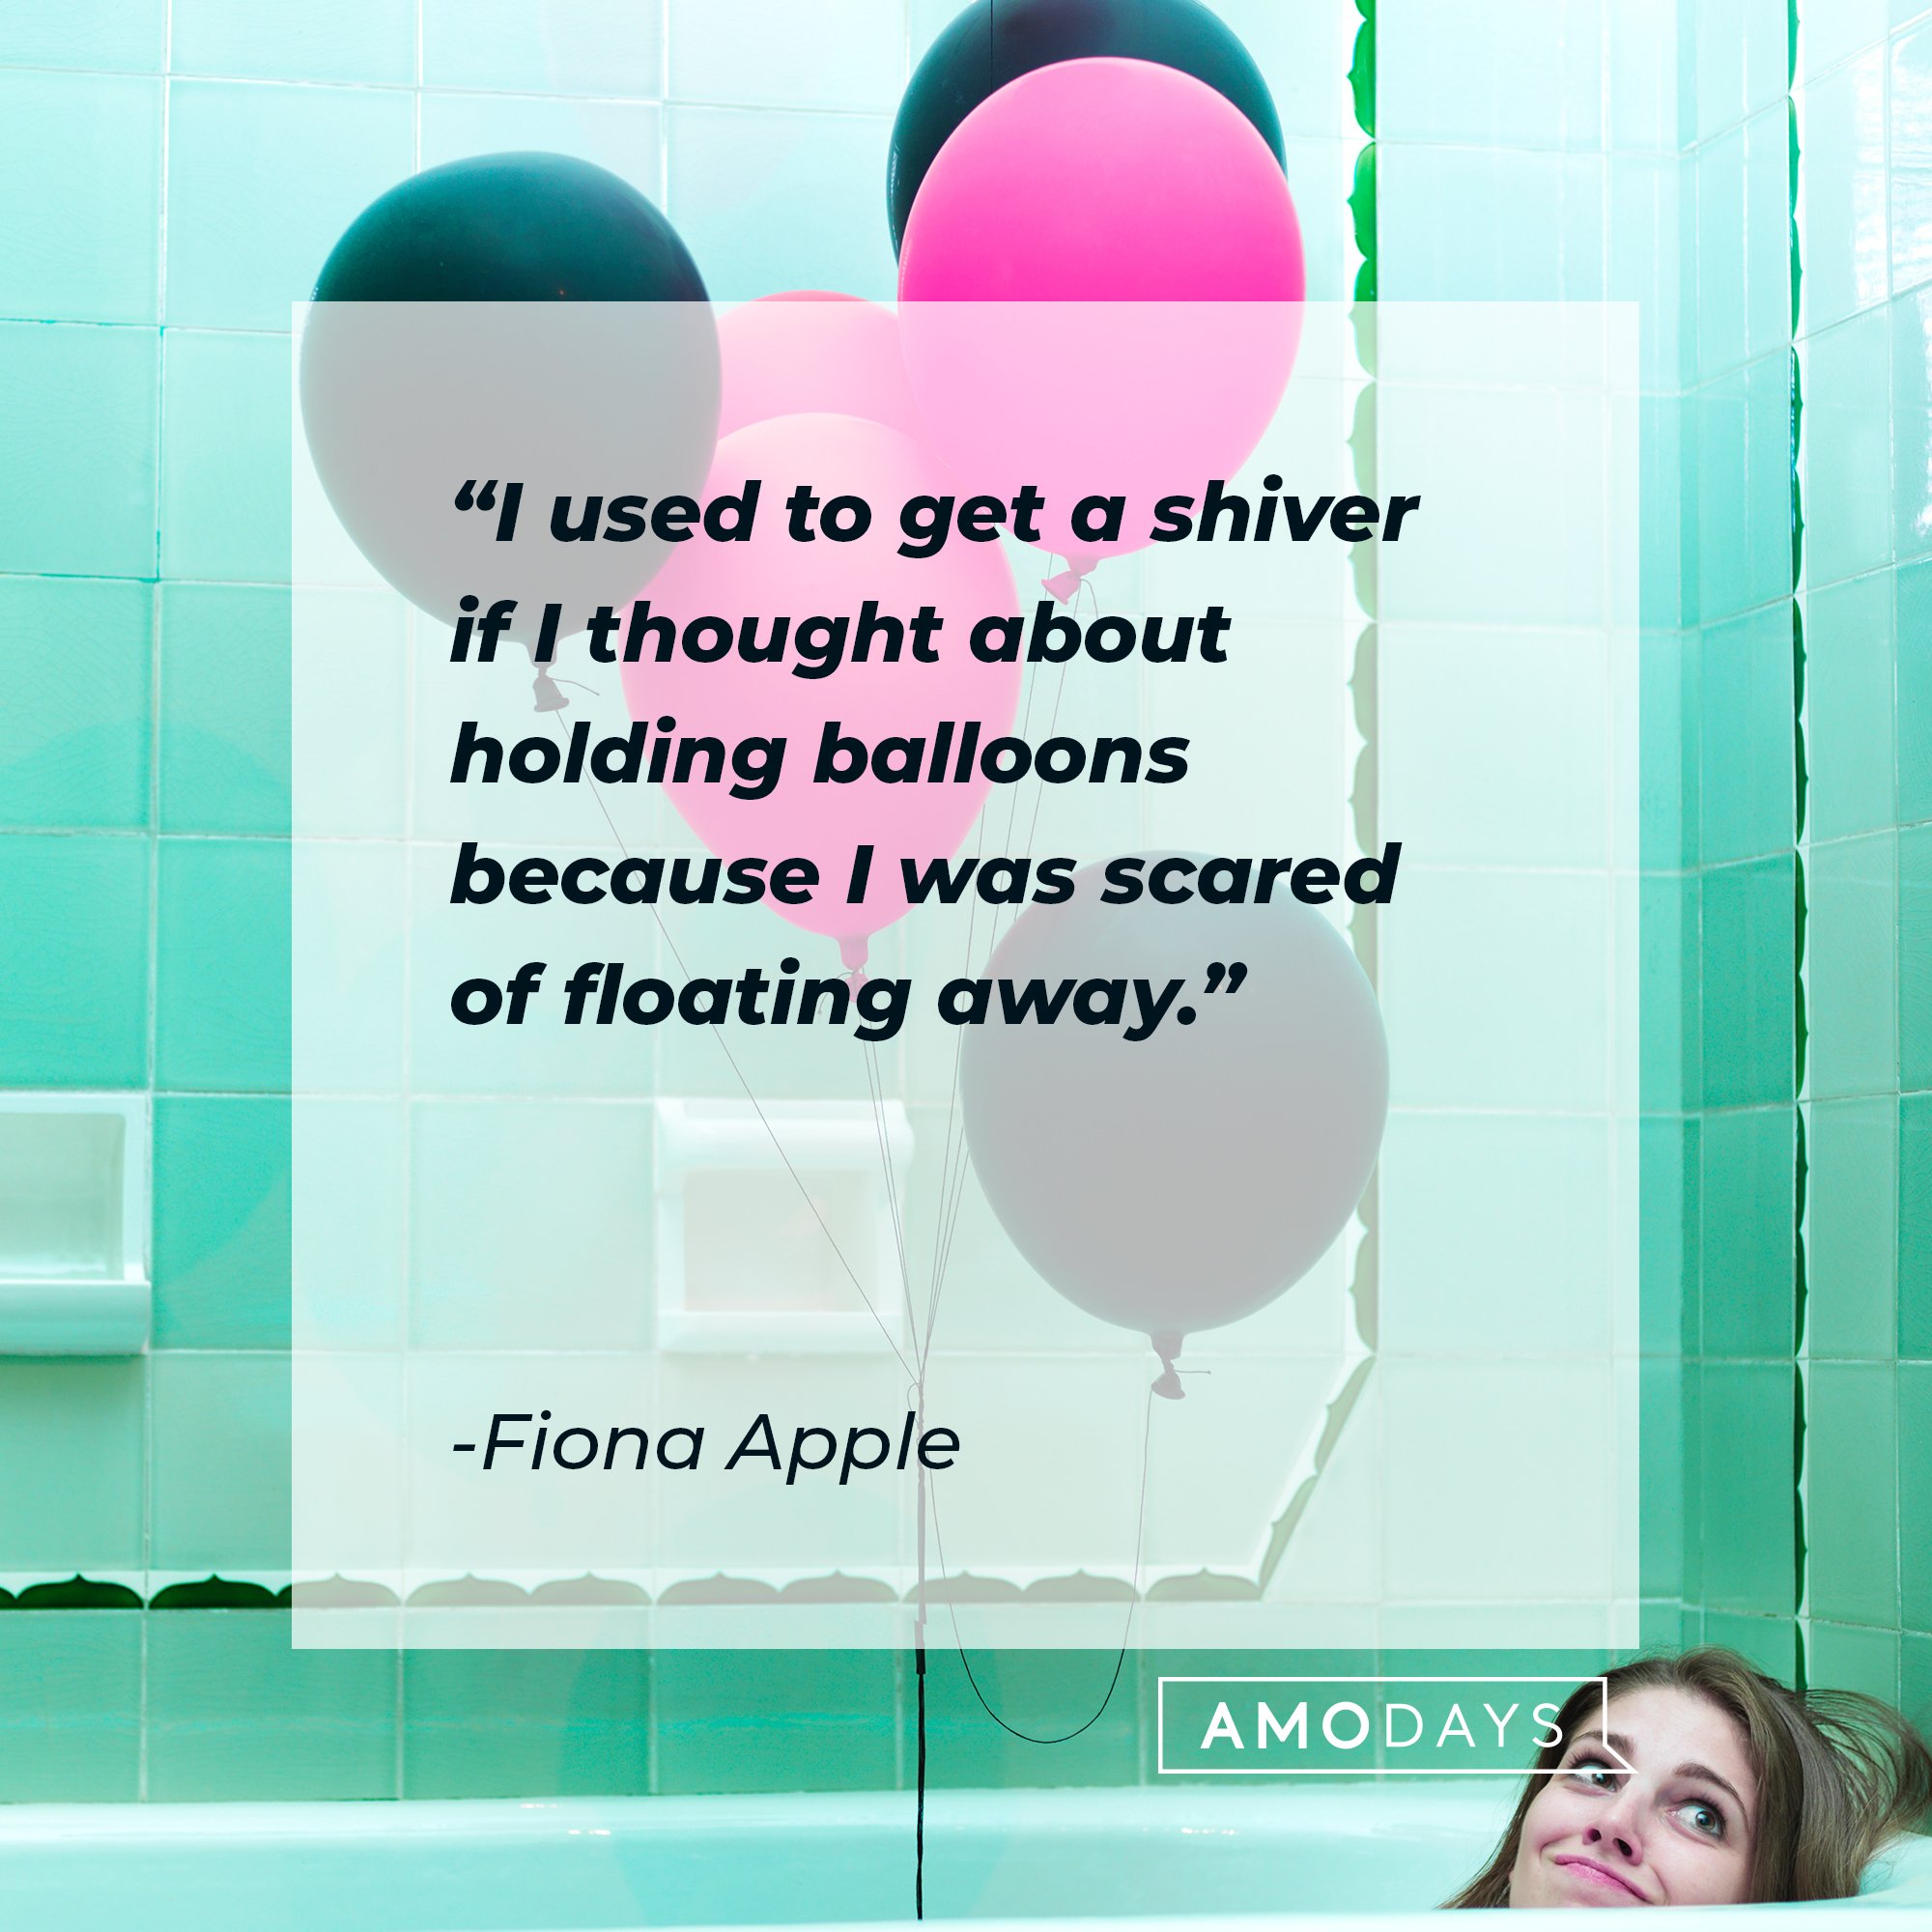 Fiona Apple’s quote: "I used to get a shiver if I thought about holding balloons because I was scared of floating away.” | Image: AmoDays 